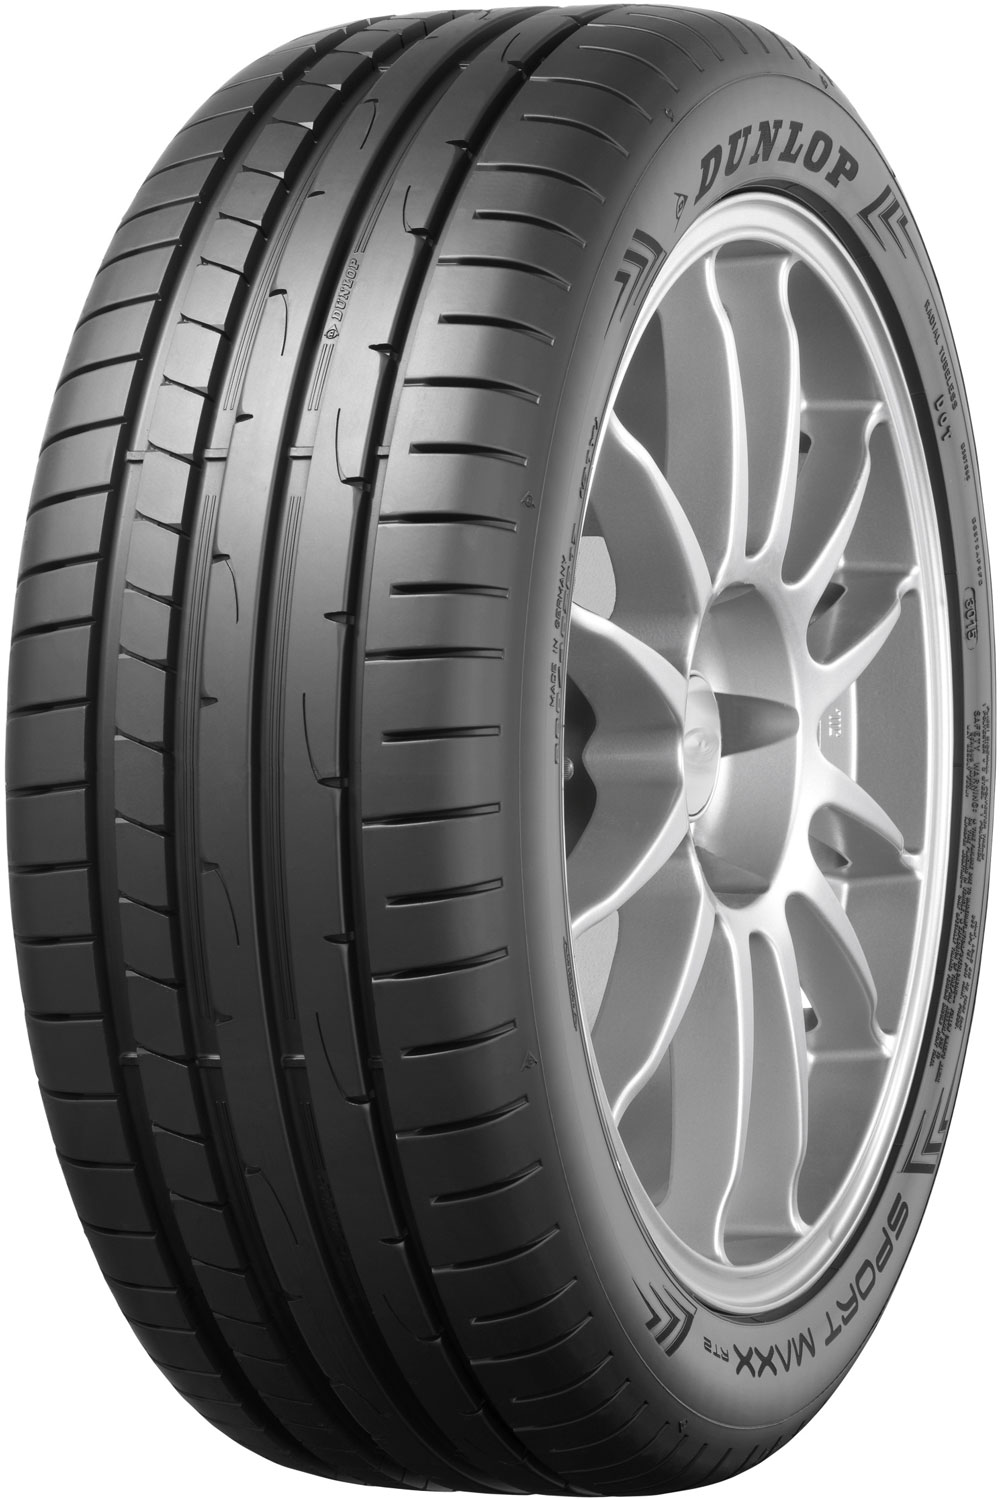 Anvelope auto DUNLOP SPORT MAXX RT 2*MO MERCEDES FP 225/55 R17 97Y